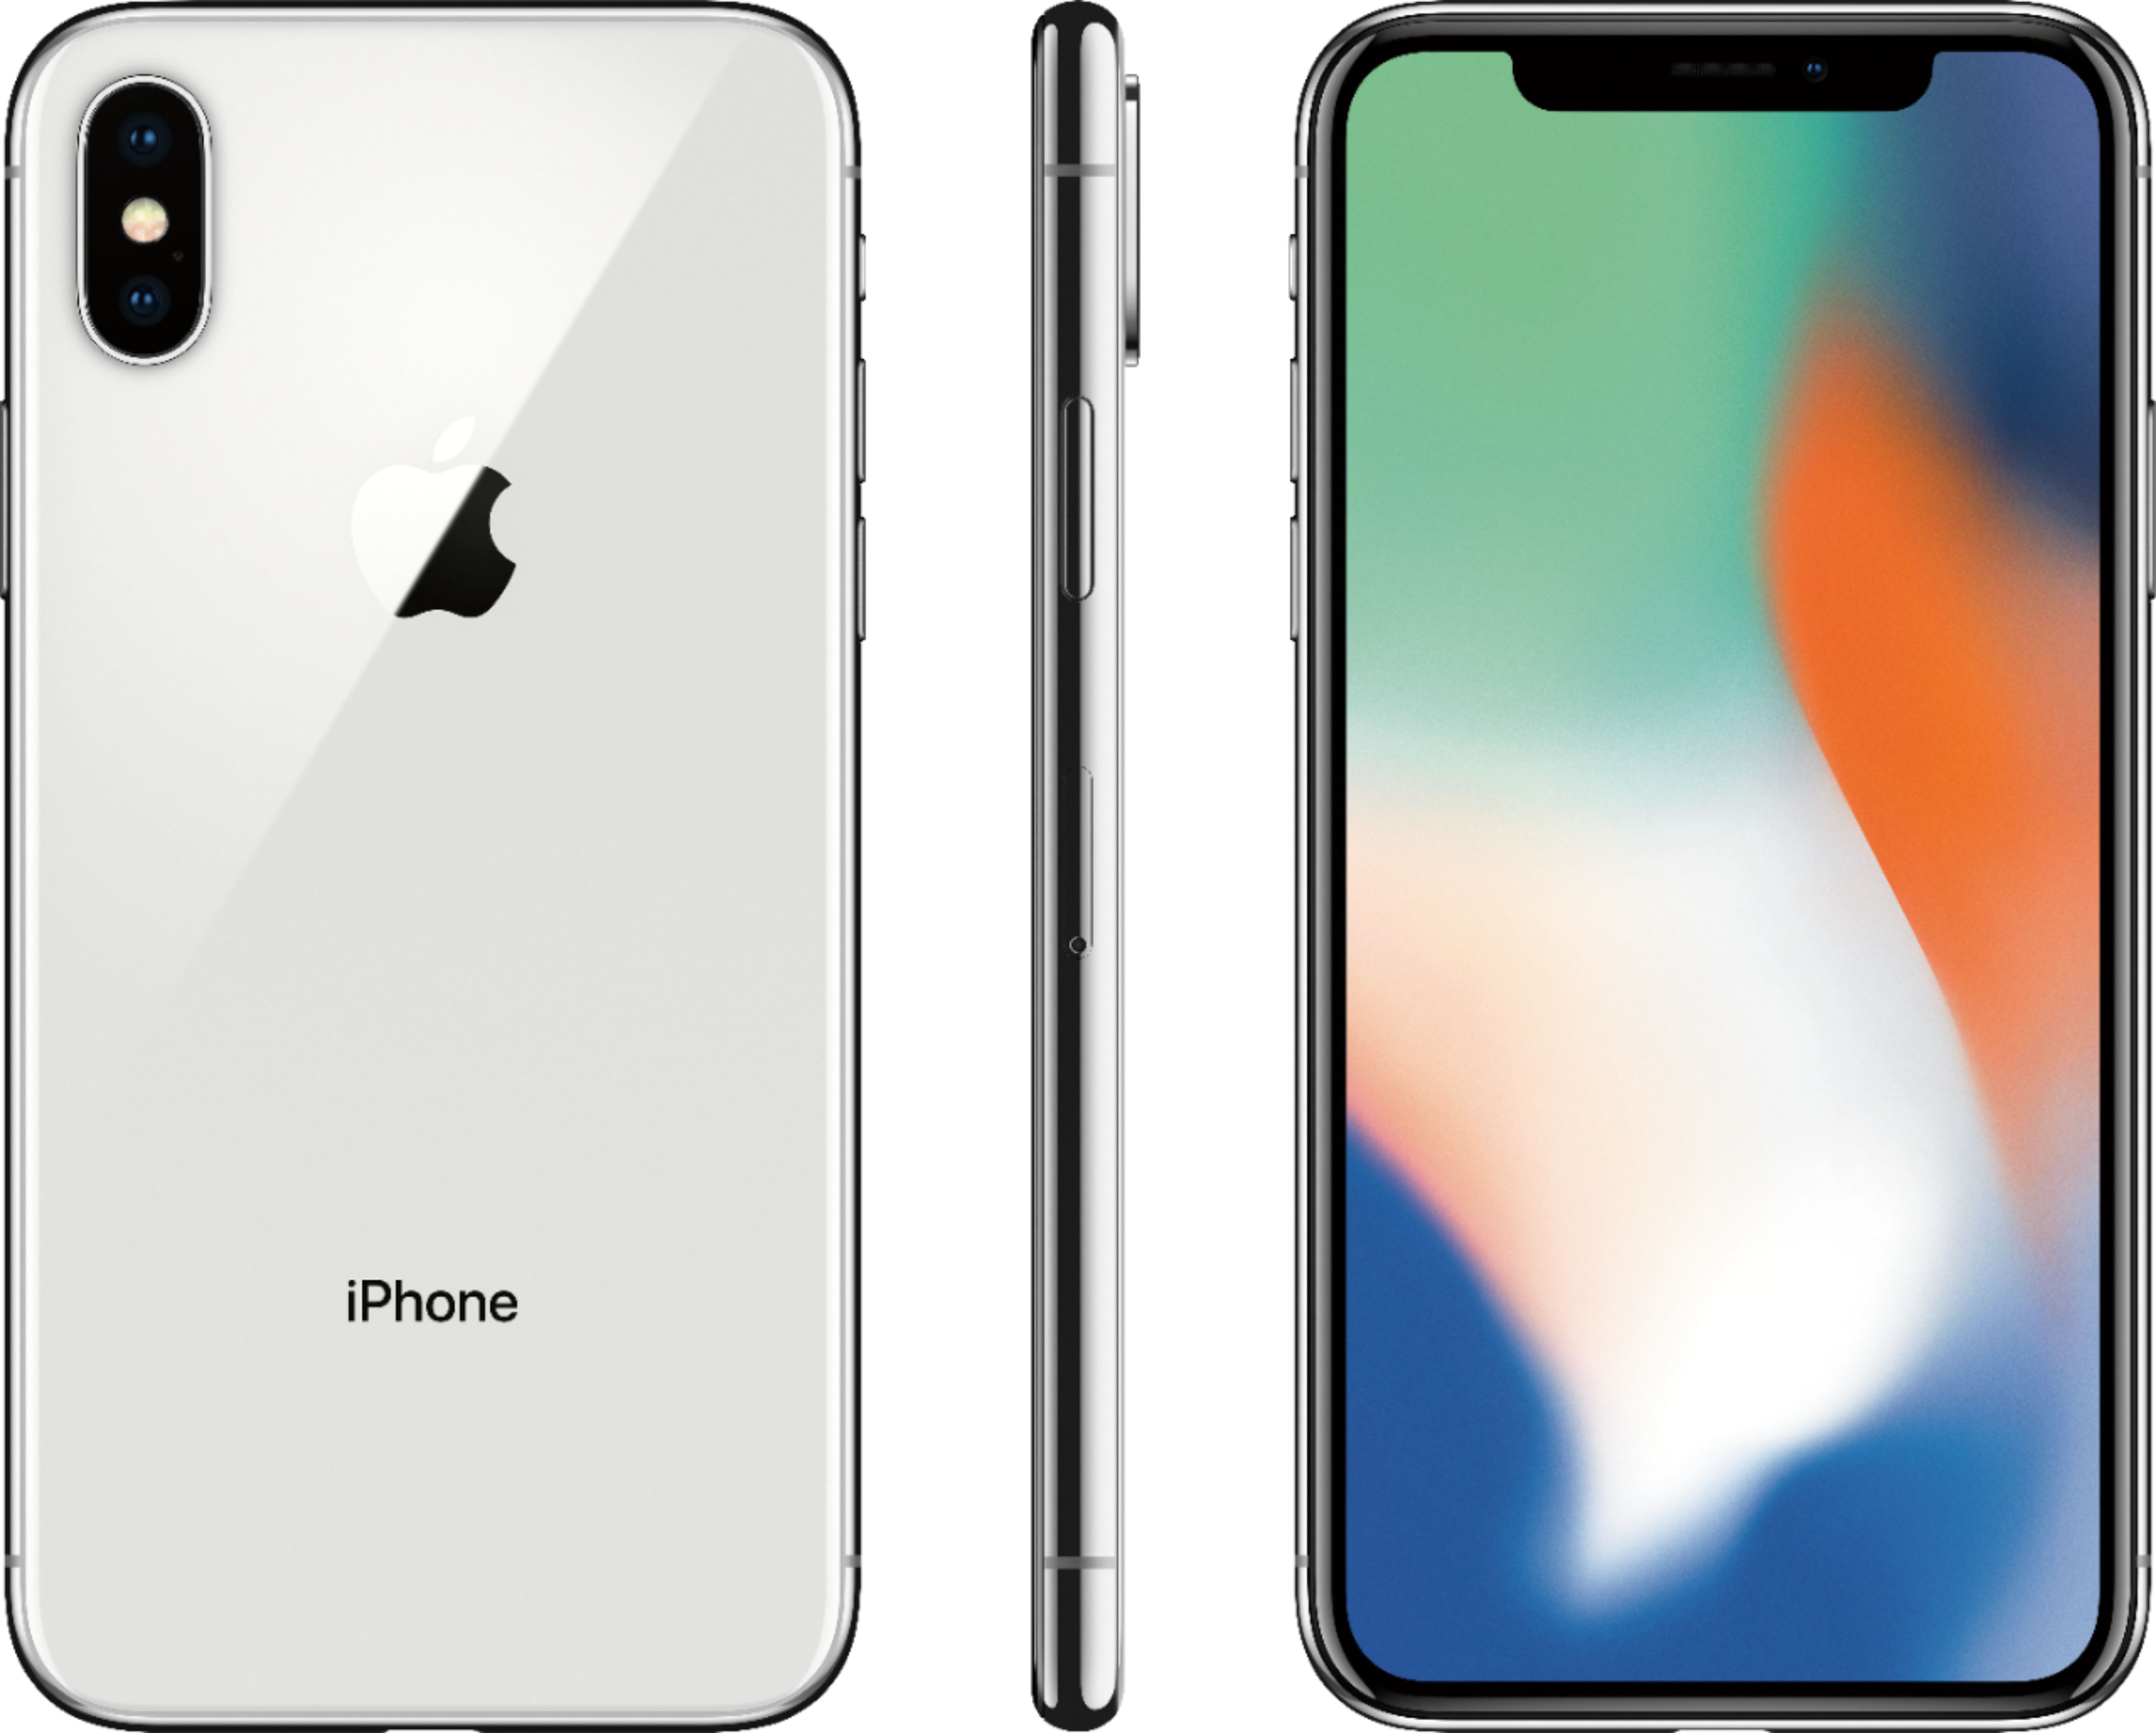 Apple Preowned iPhone X with 256GB Memory Cell Phone (Unlocked 